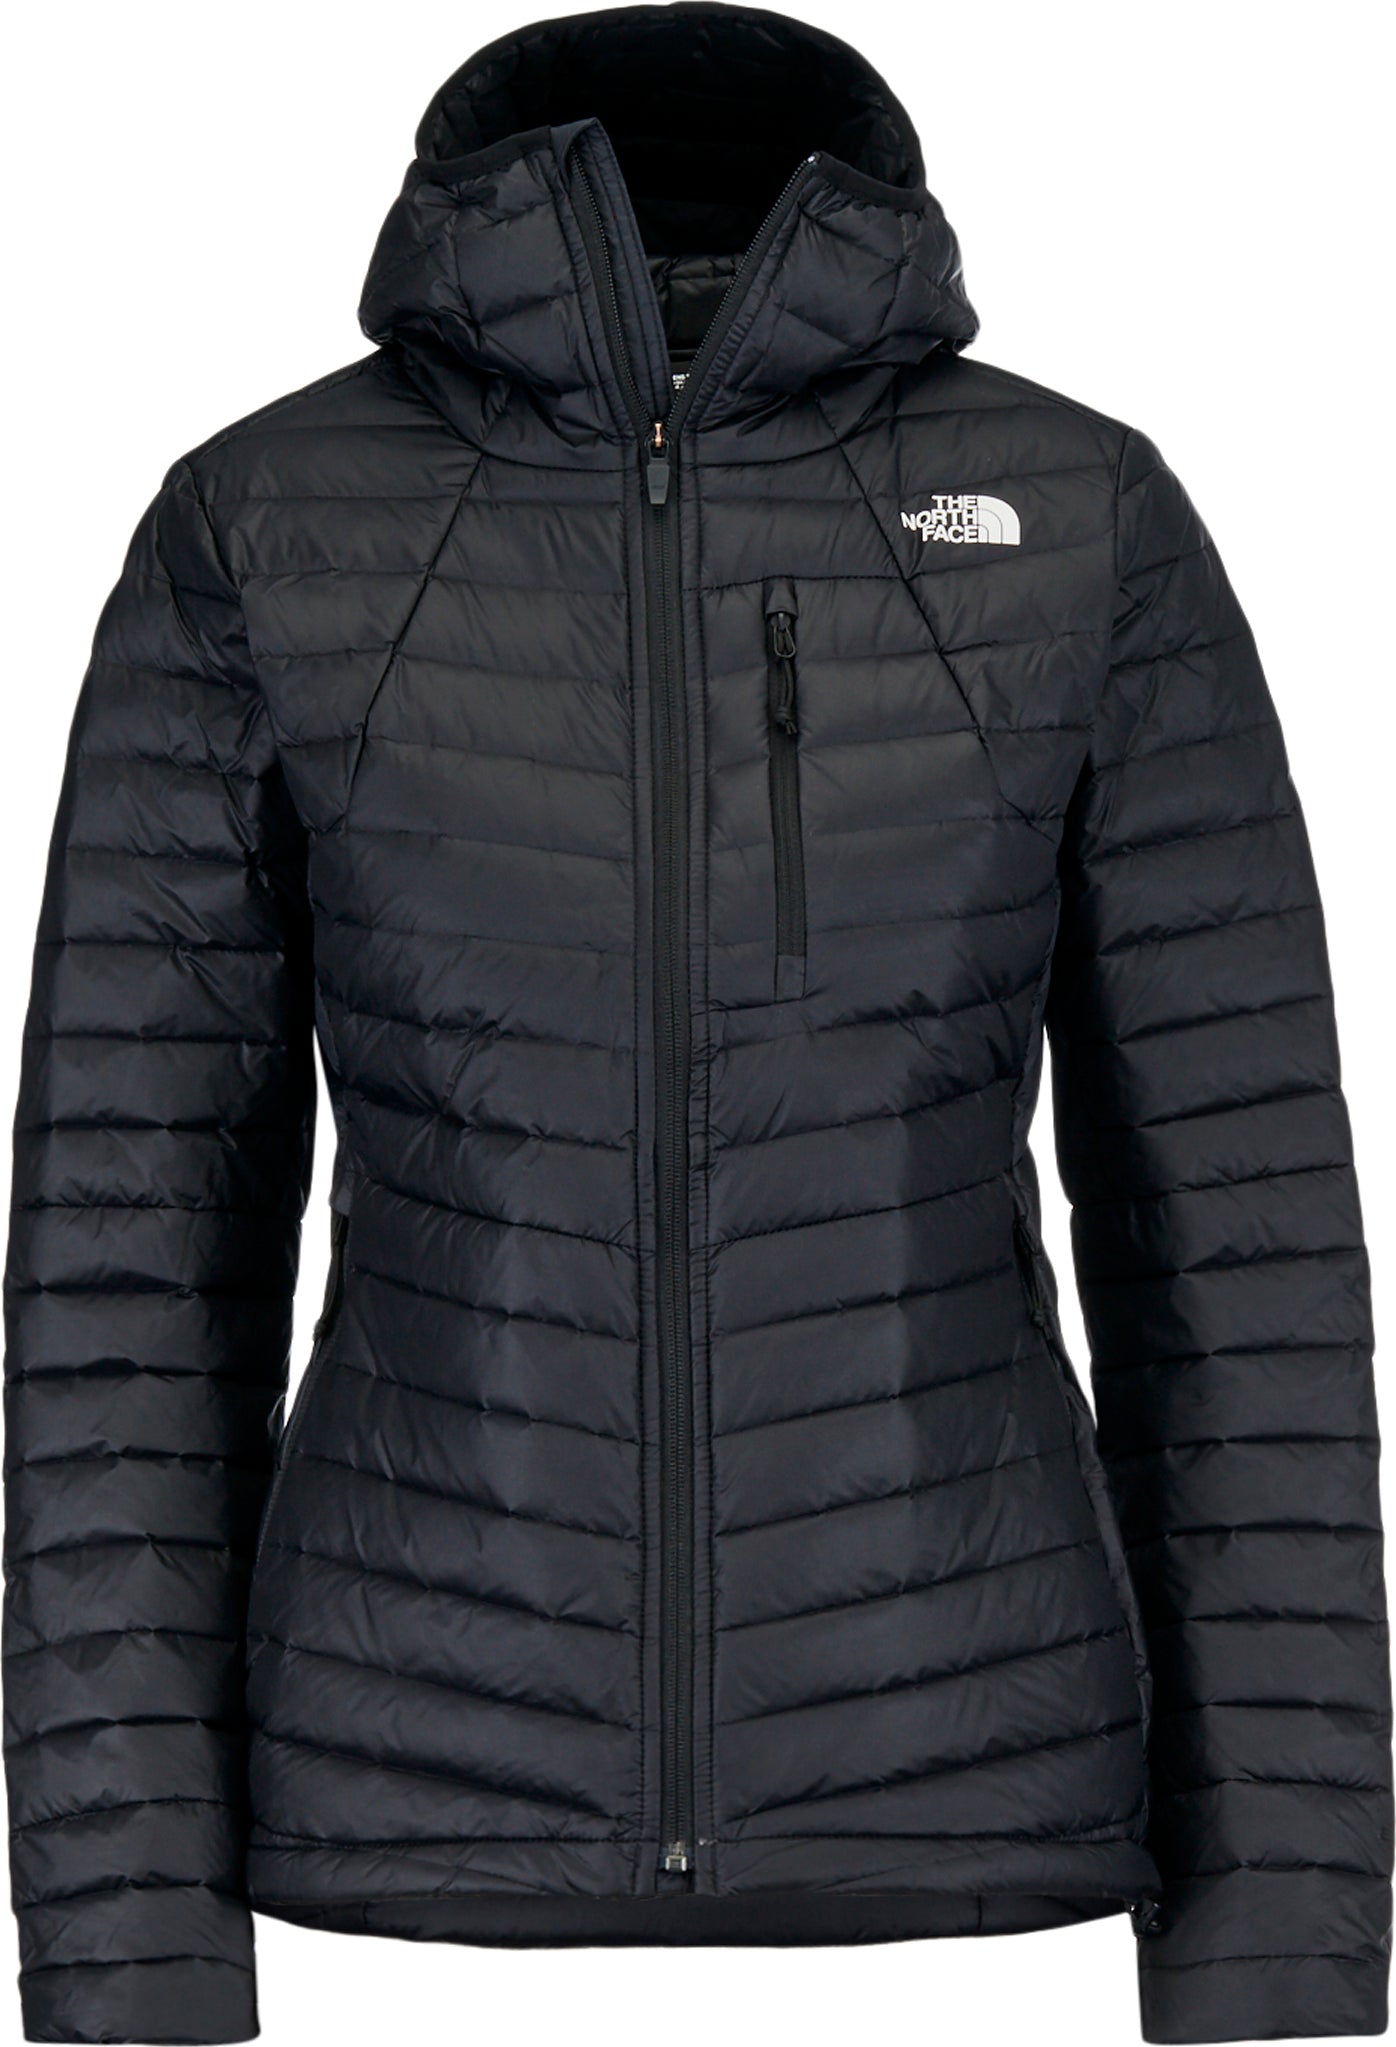 The North Face Premonition Down Jacket 